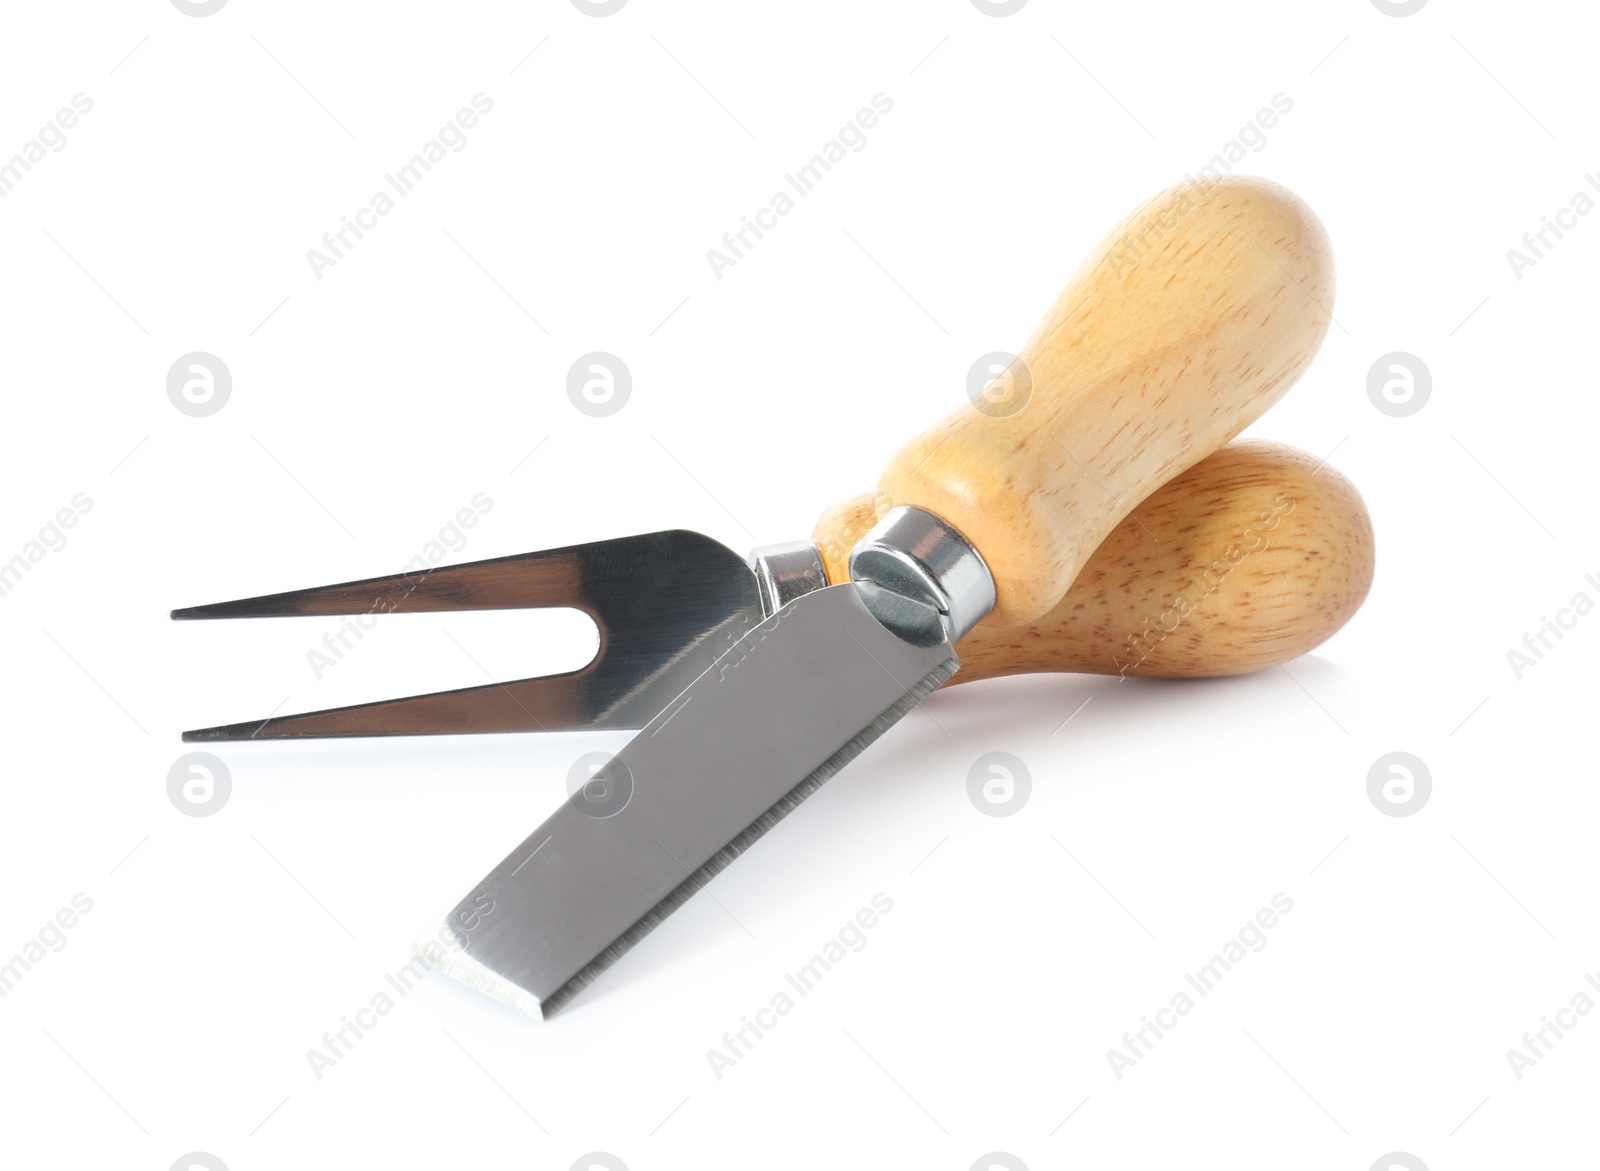 Photo of Plane knife and cheese fork on white background